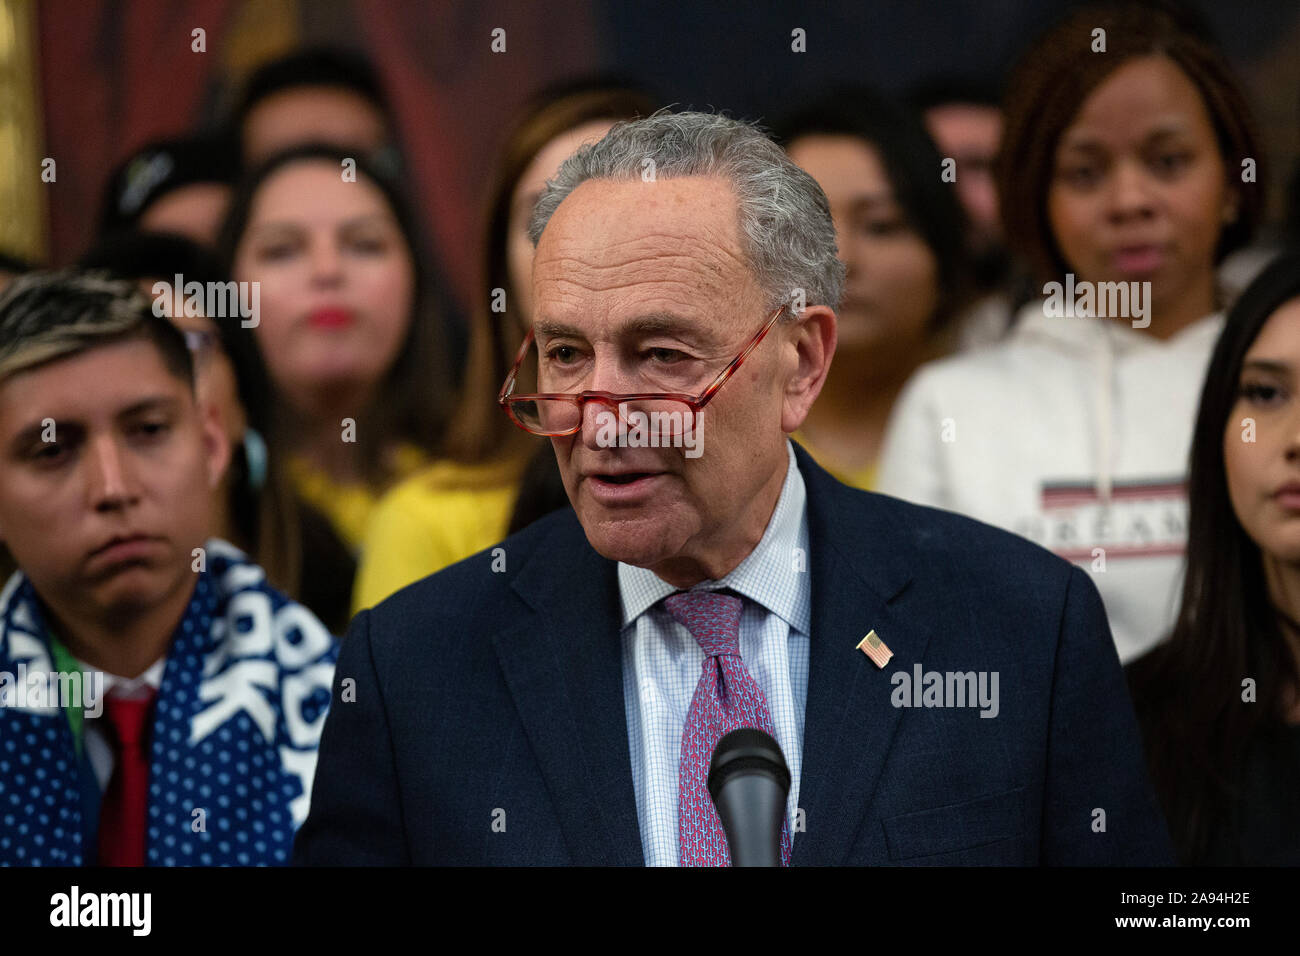 United States Senate Minority Leader Chuck Schumer (Democrat of New York), joined by other Democratic lawmakers, speaks during a press conference on the Deferred Action for Childhood Arrivals program on Capitol Hill in Washington, DC, U.S. on Tuesday, November 12, 2019. The Supreme Court is currently hearing a case that will determine the legality and future of the DACA program. Credit: Stefani Reynolds/CNP /MediaPunch Stock Photo